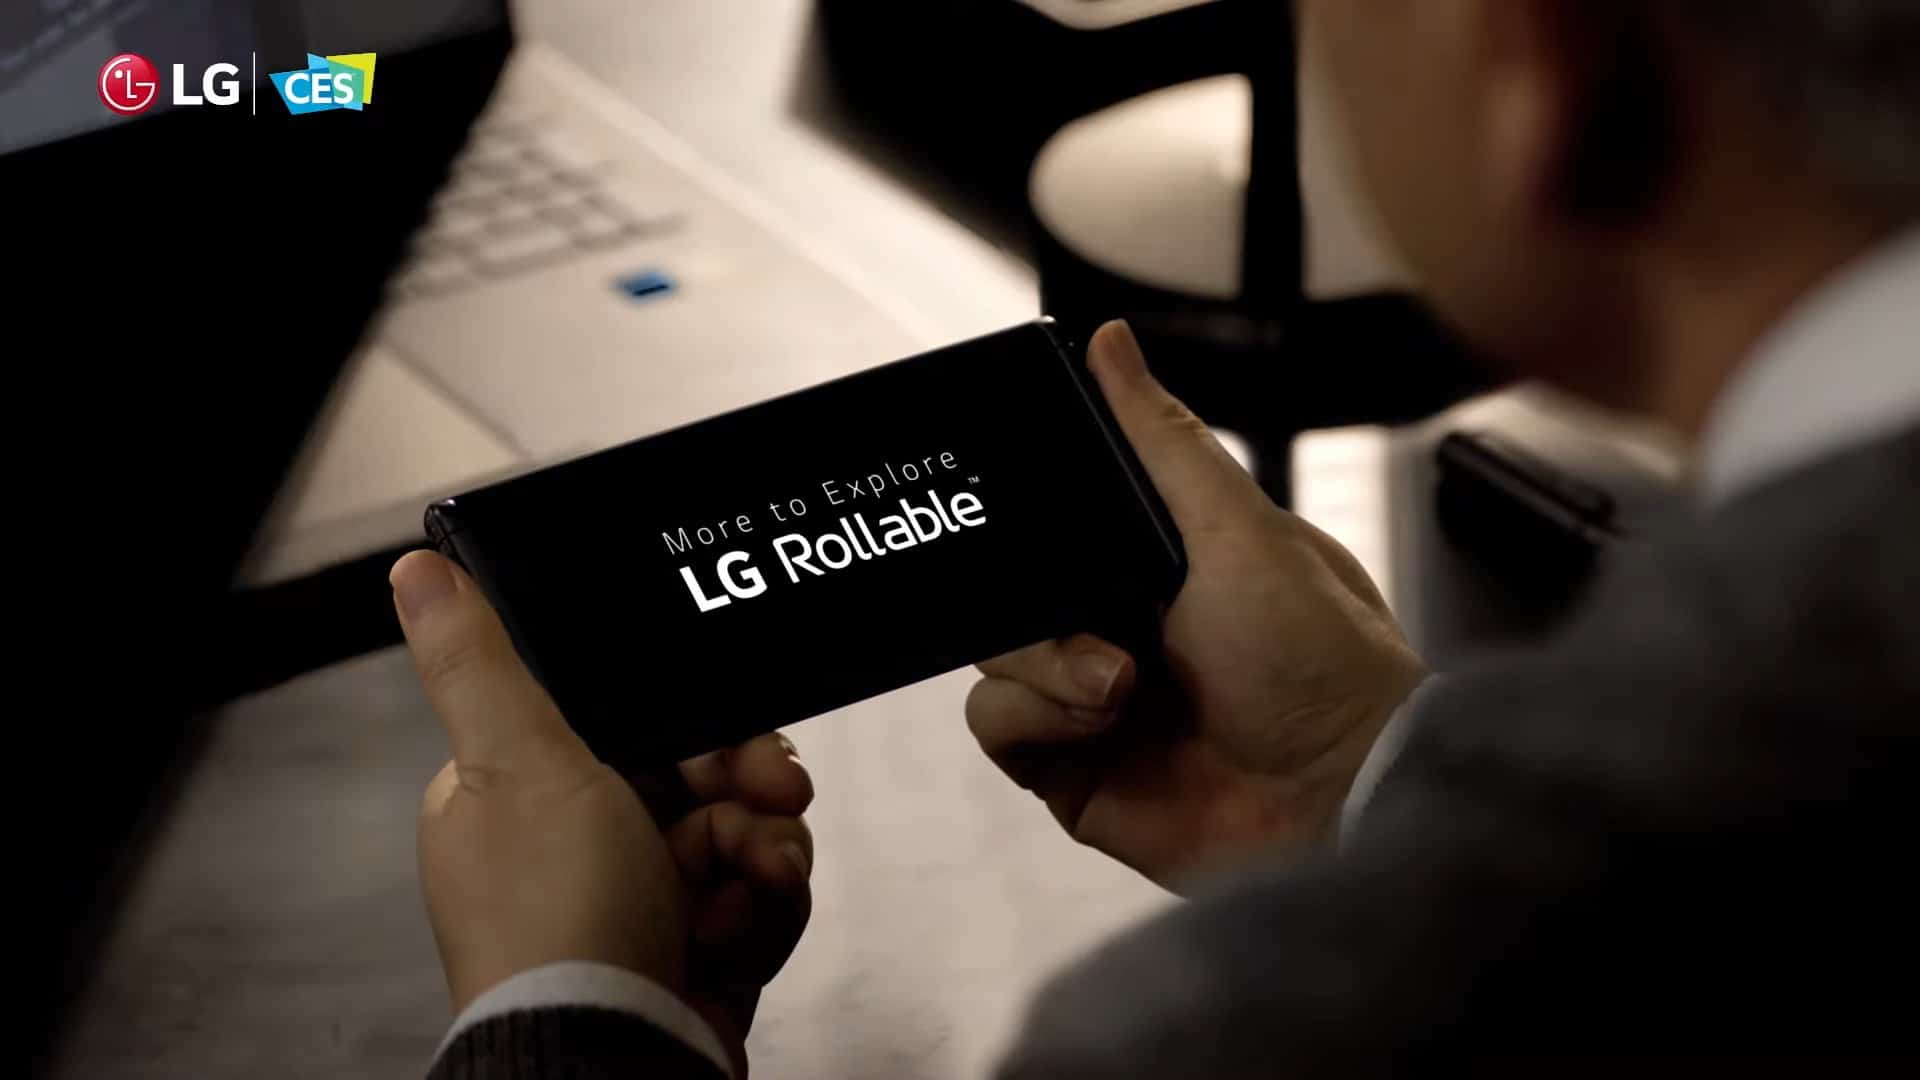 Das LG Rollable